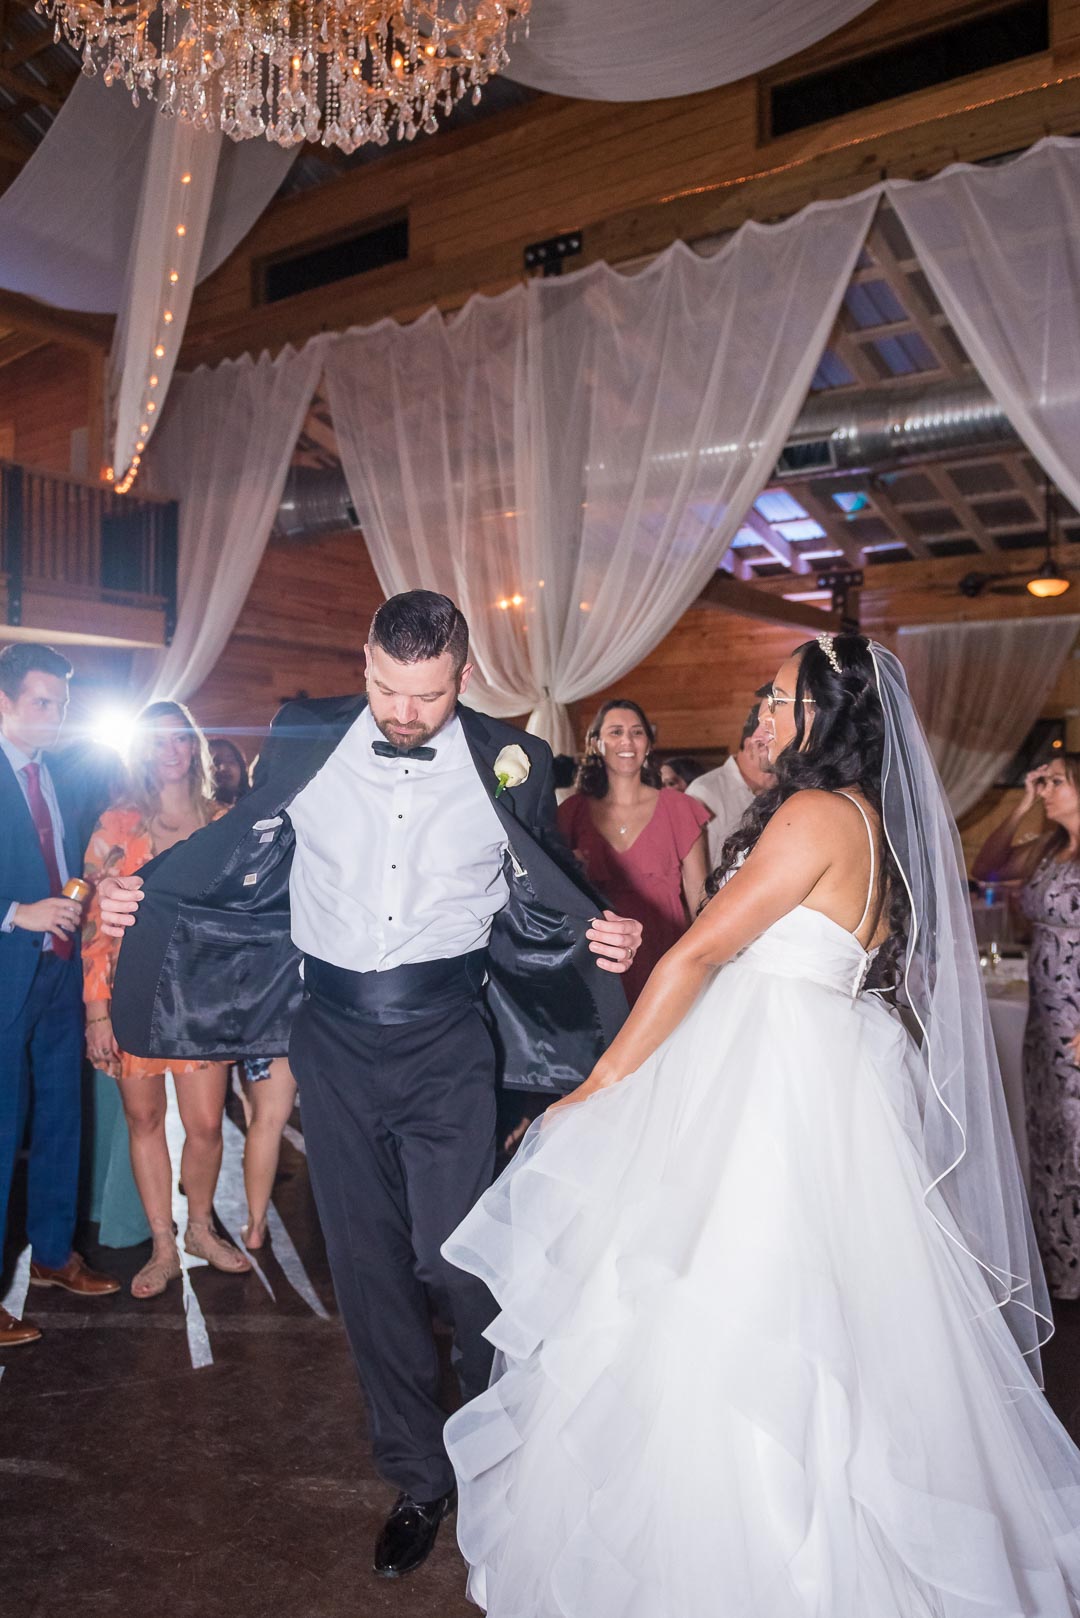 Bride and Groom dancing on the dance floor in barn reception at the Wheeler House